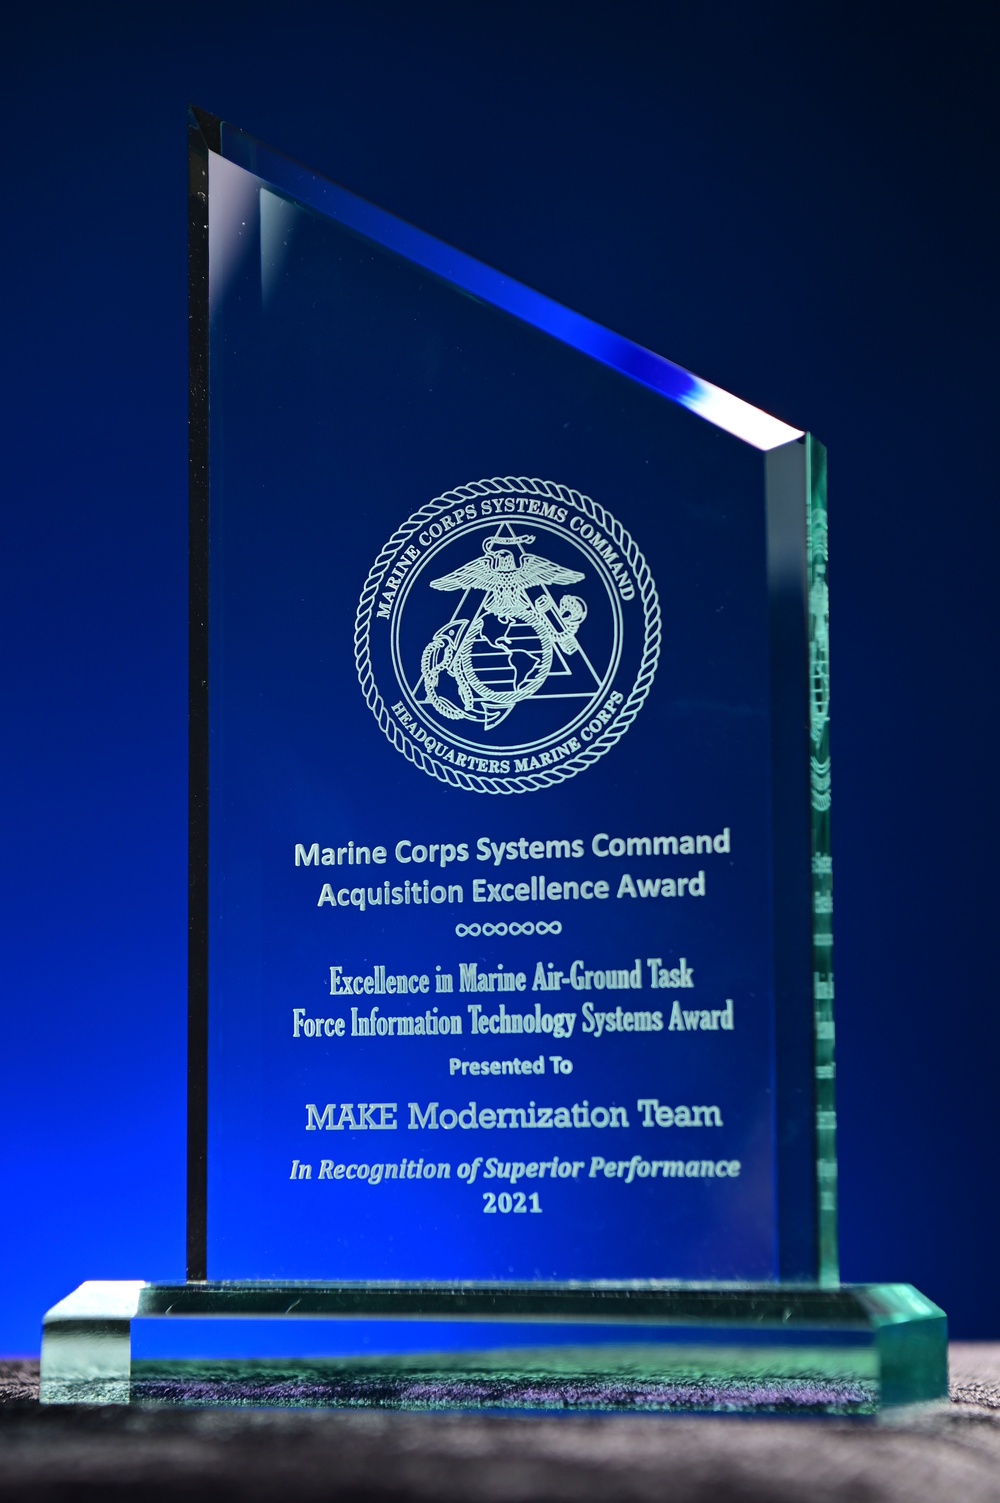 NSWC Corona Awarded for Excellence in Marine Air-Ground IT Systems, MAKE application